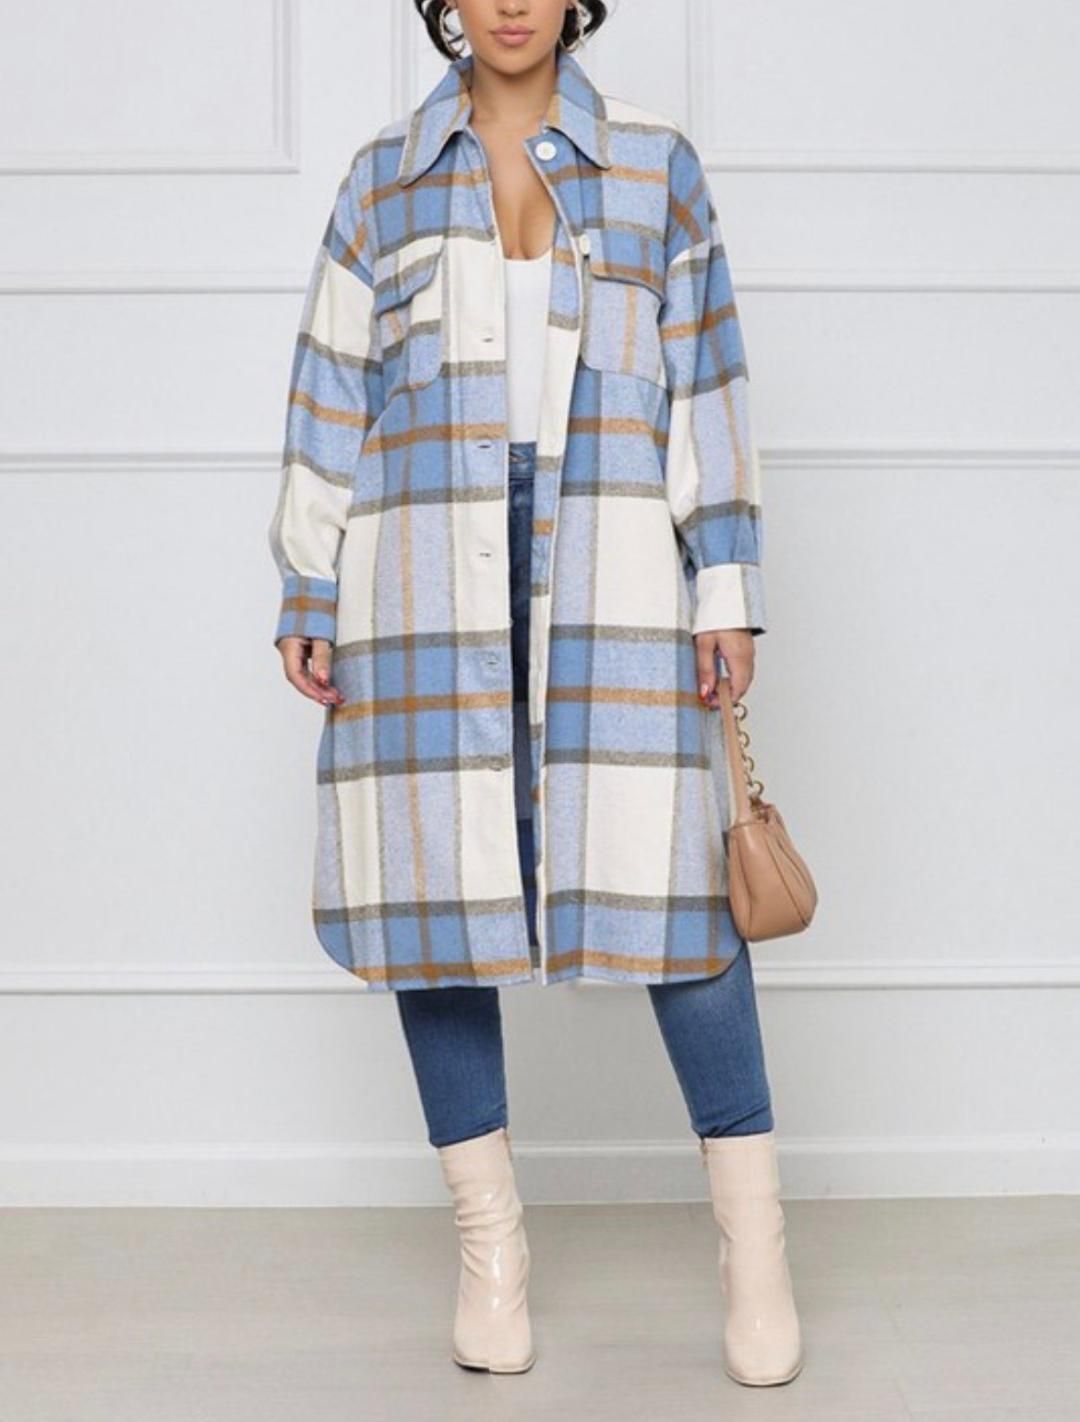 Plaid Jacket Outfit Ideas for
  Women